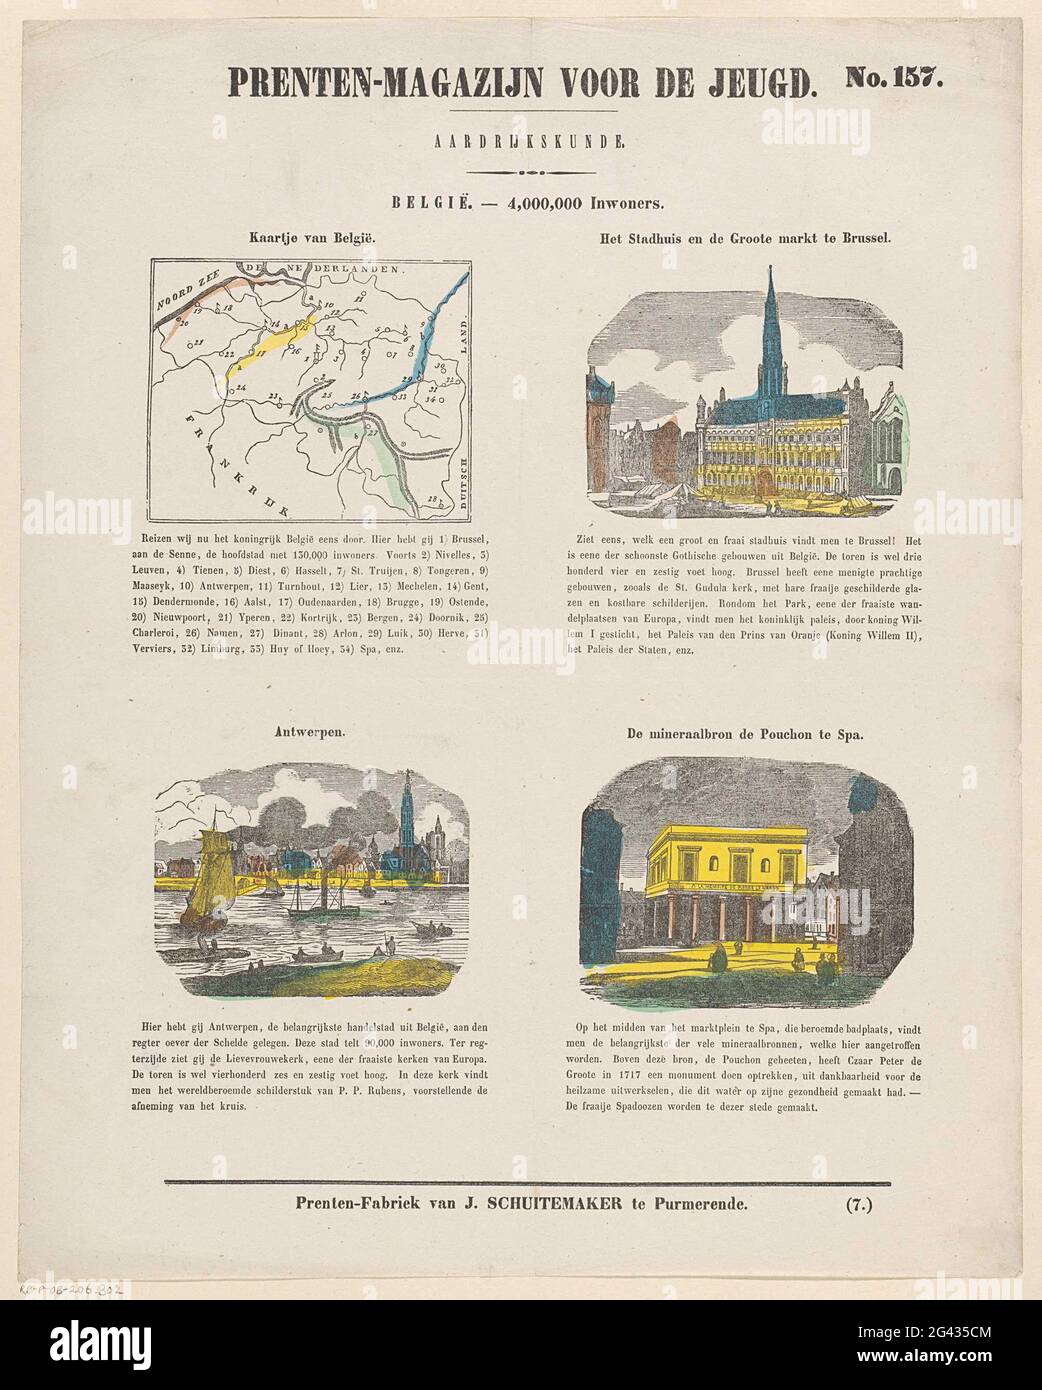 Belgium. - 4,000,000 inhabitants; Print warehouse for the youth; Geography.  Leaf with 4 performances about Belgium with a map and important places and  monuments: the Grote Markt in Brussels, Antwerp and Spa.